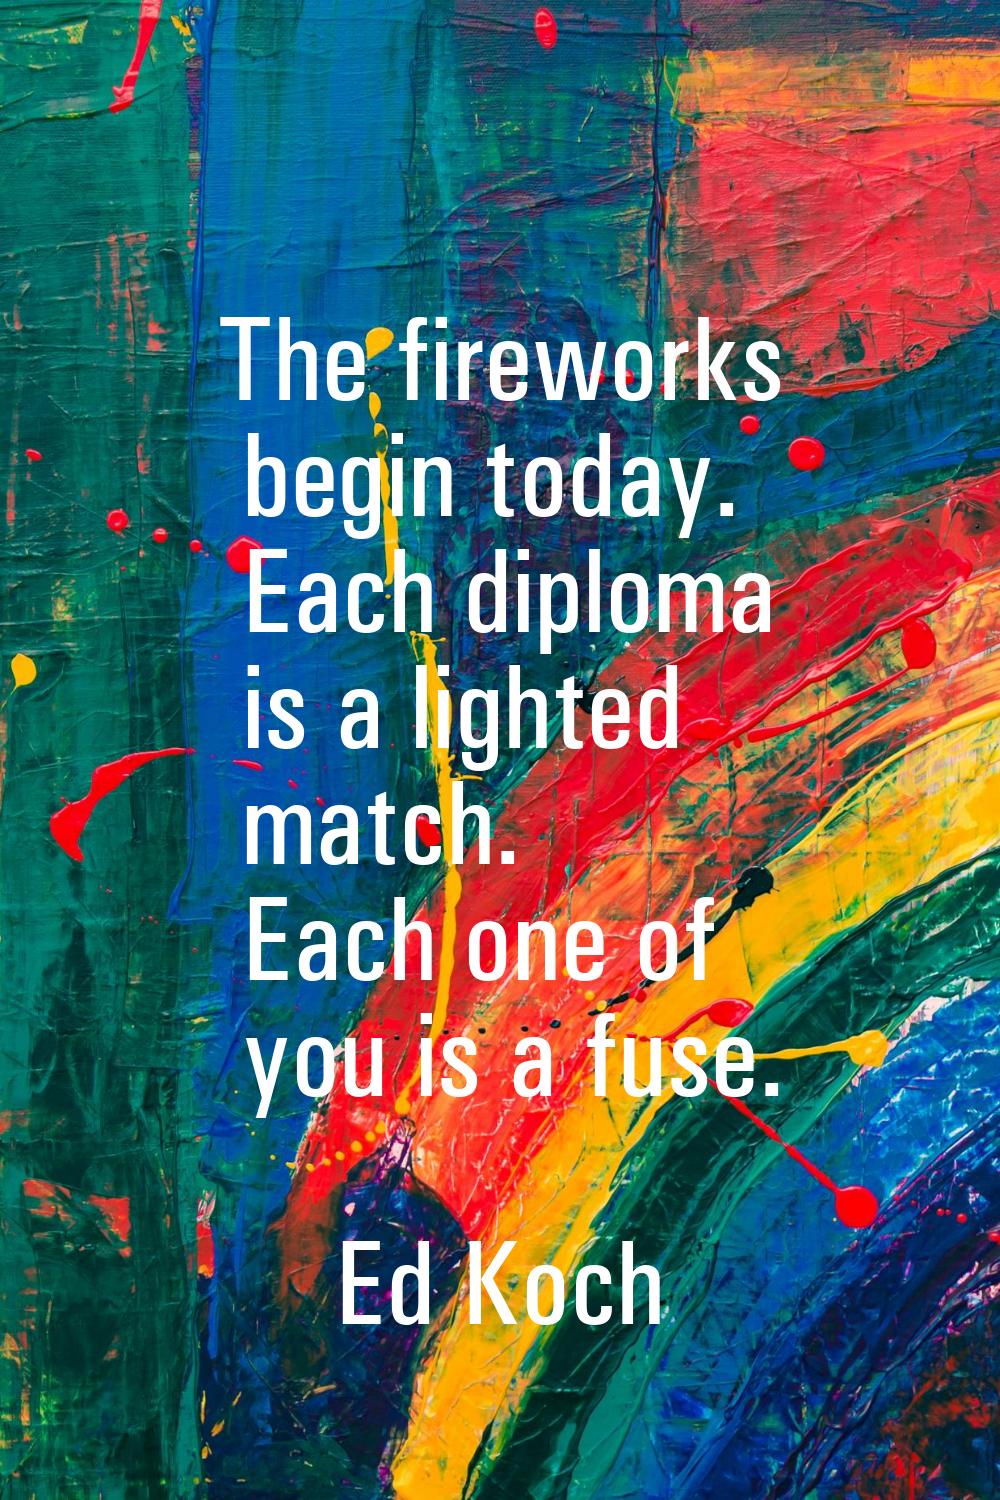 The fireworks begin today. Each diploma is a lighted match. Each one of you is a fuse.